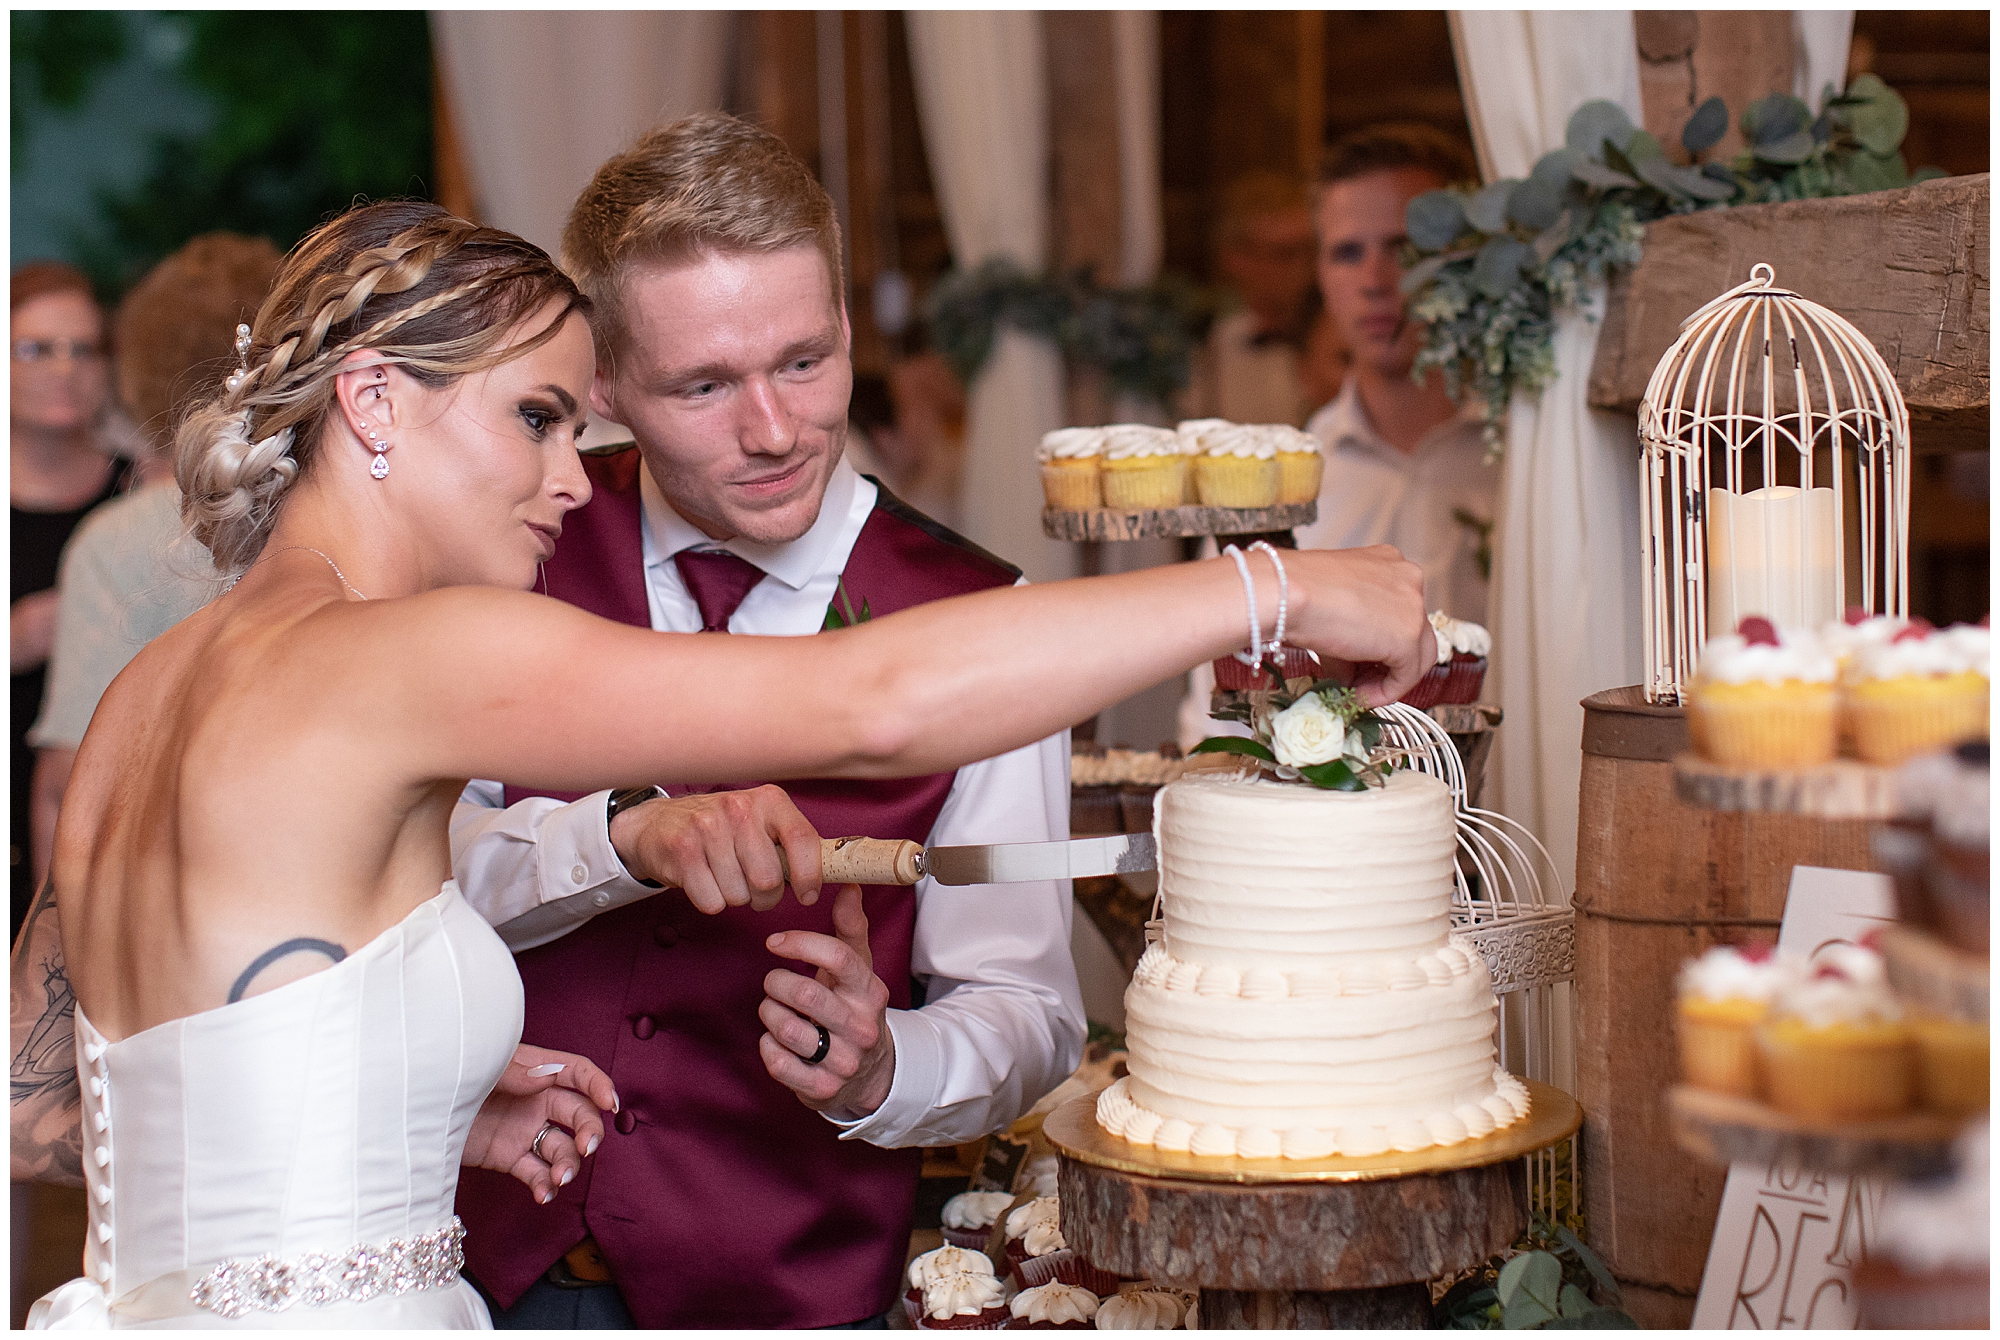 cake cutting bride and groom 